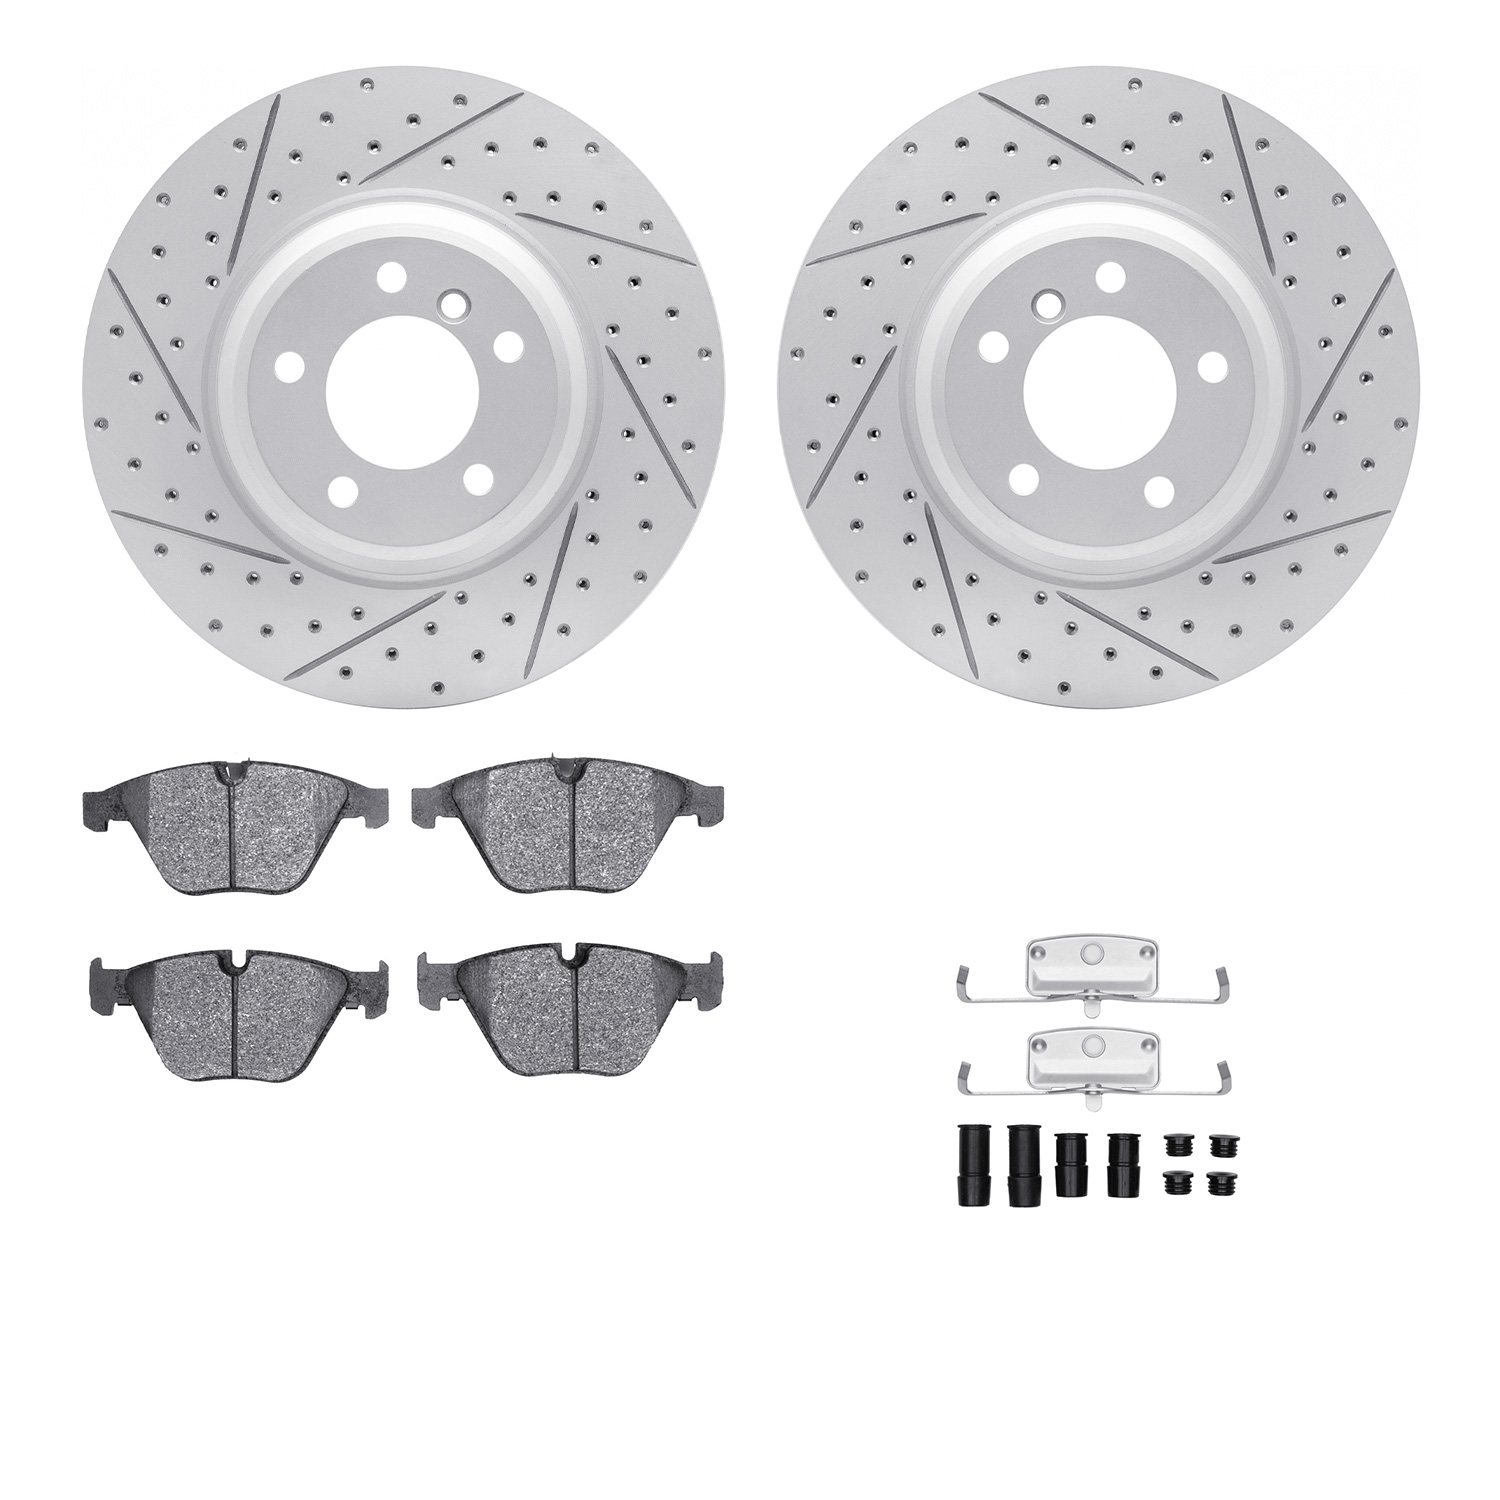 2512-31070 Geoperformance Drilled/Slotted Rotors w/5000 Advanced Brake Pads Kit & Hardware, 2007-2015 BMW, Position: Front